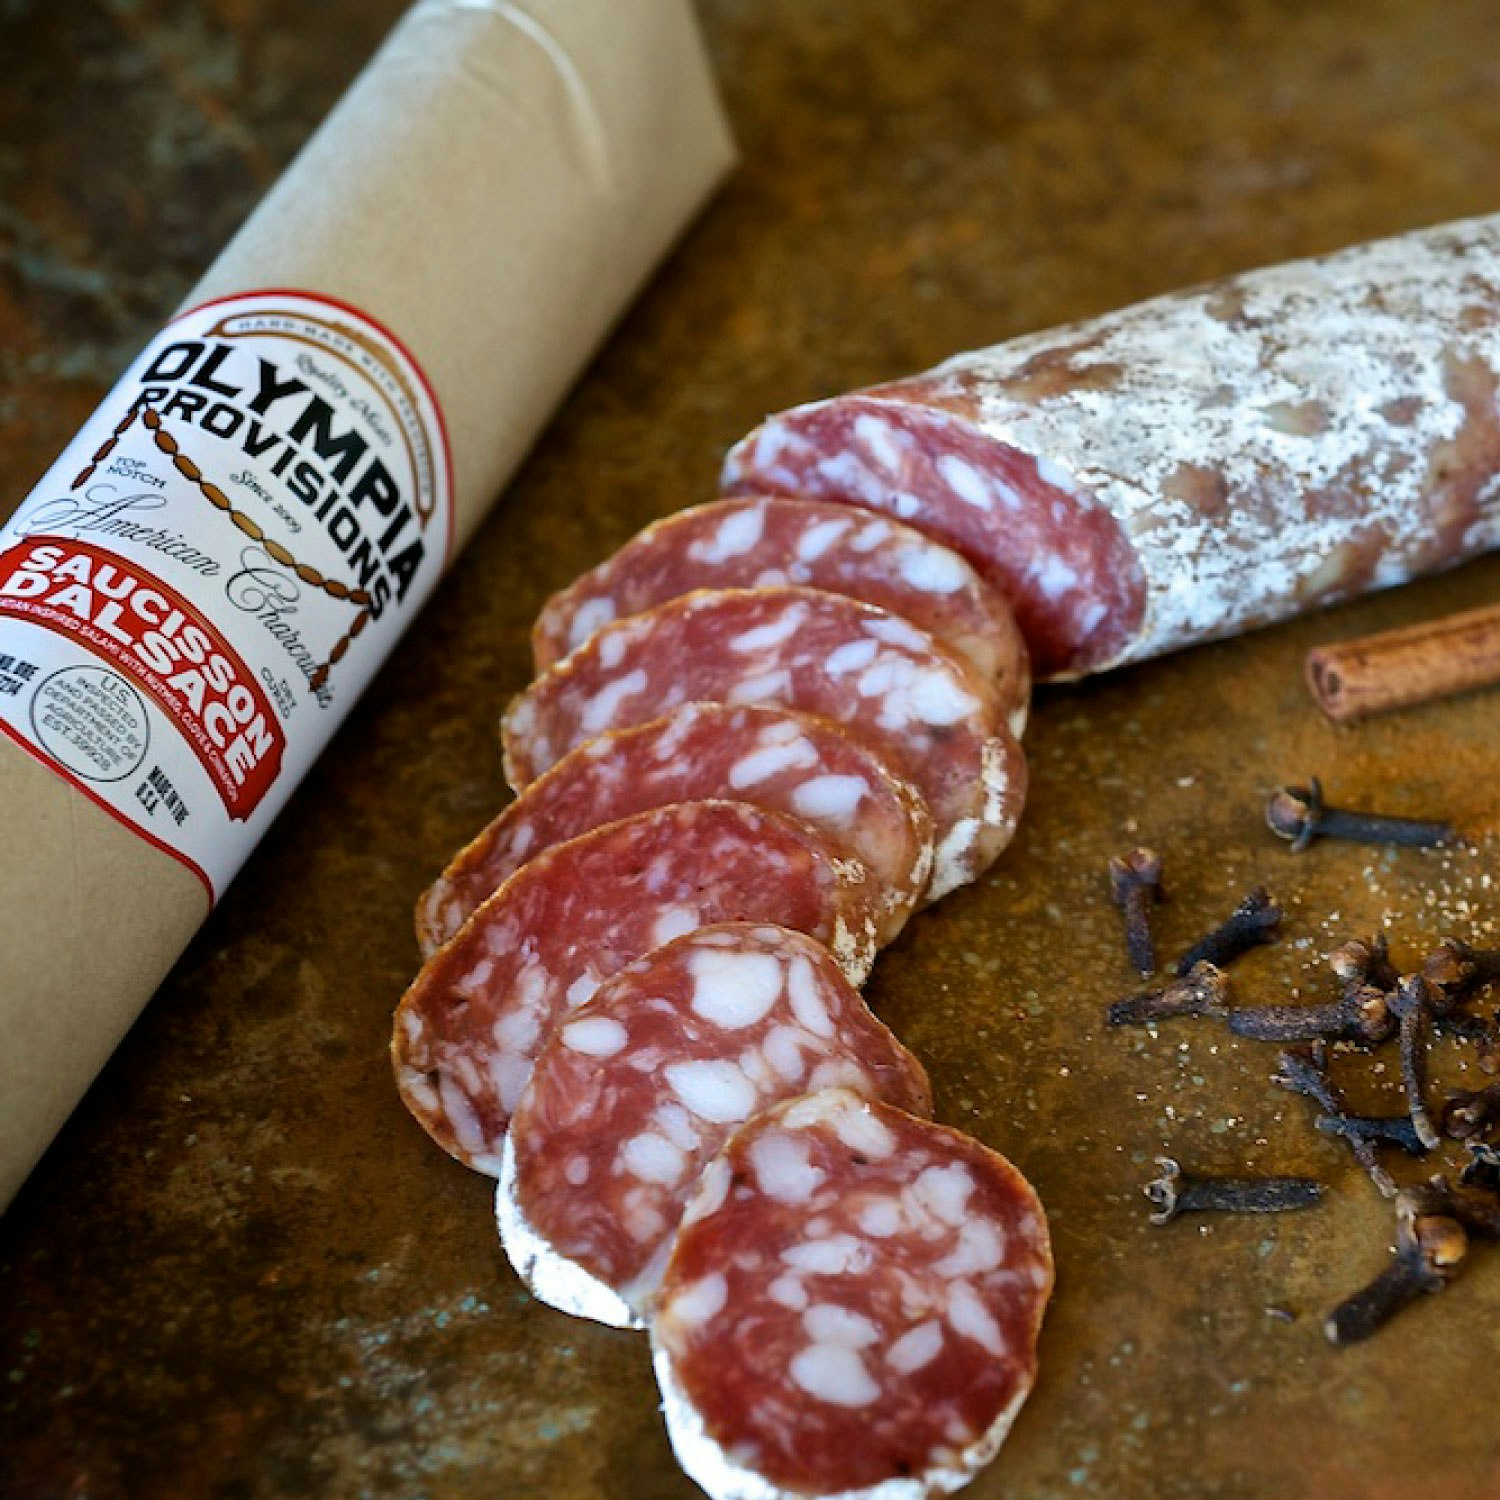 Olympia Provisions Saucisson DAlsace meats